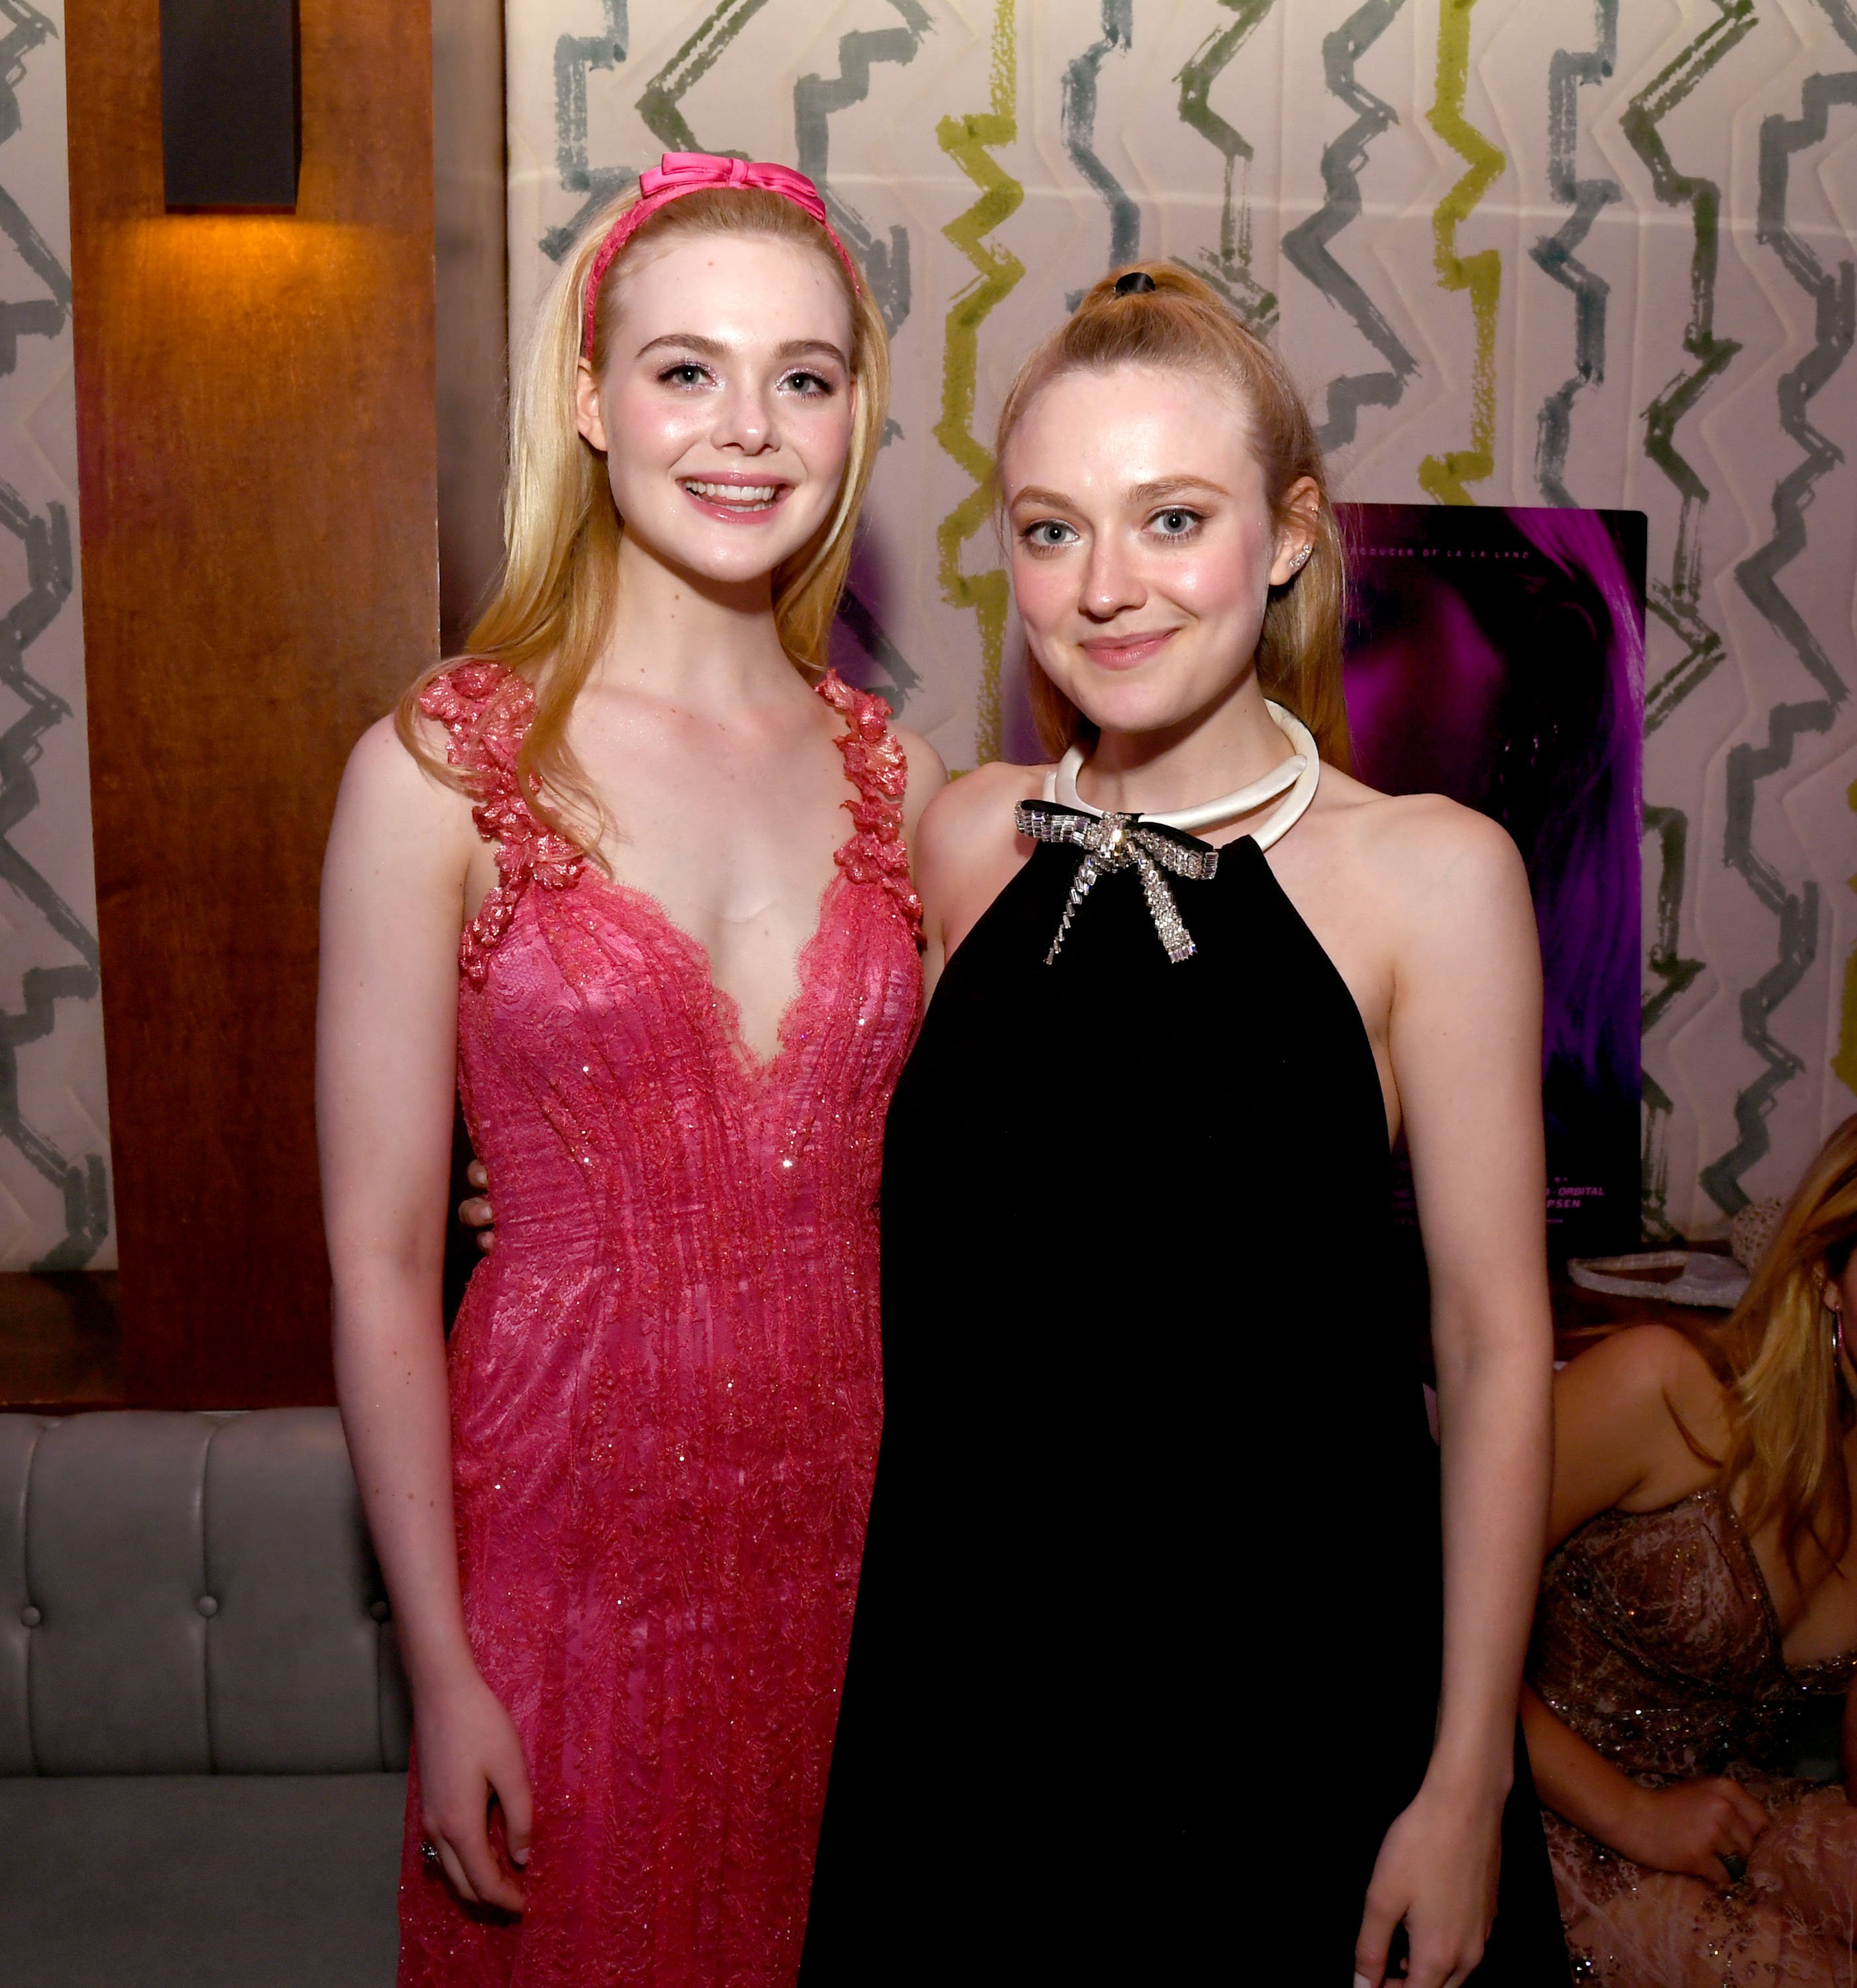 Elle Fanning and Dakota Fanning pose at the after party for a special screening of Bleeker Street's "Teen Spirit" at the Highlight Room on April 02, 2019 in Hollywood, California | Photo: Getty Images